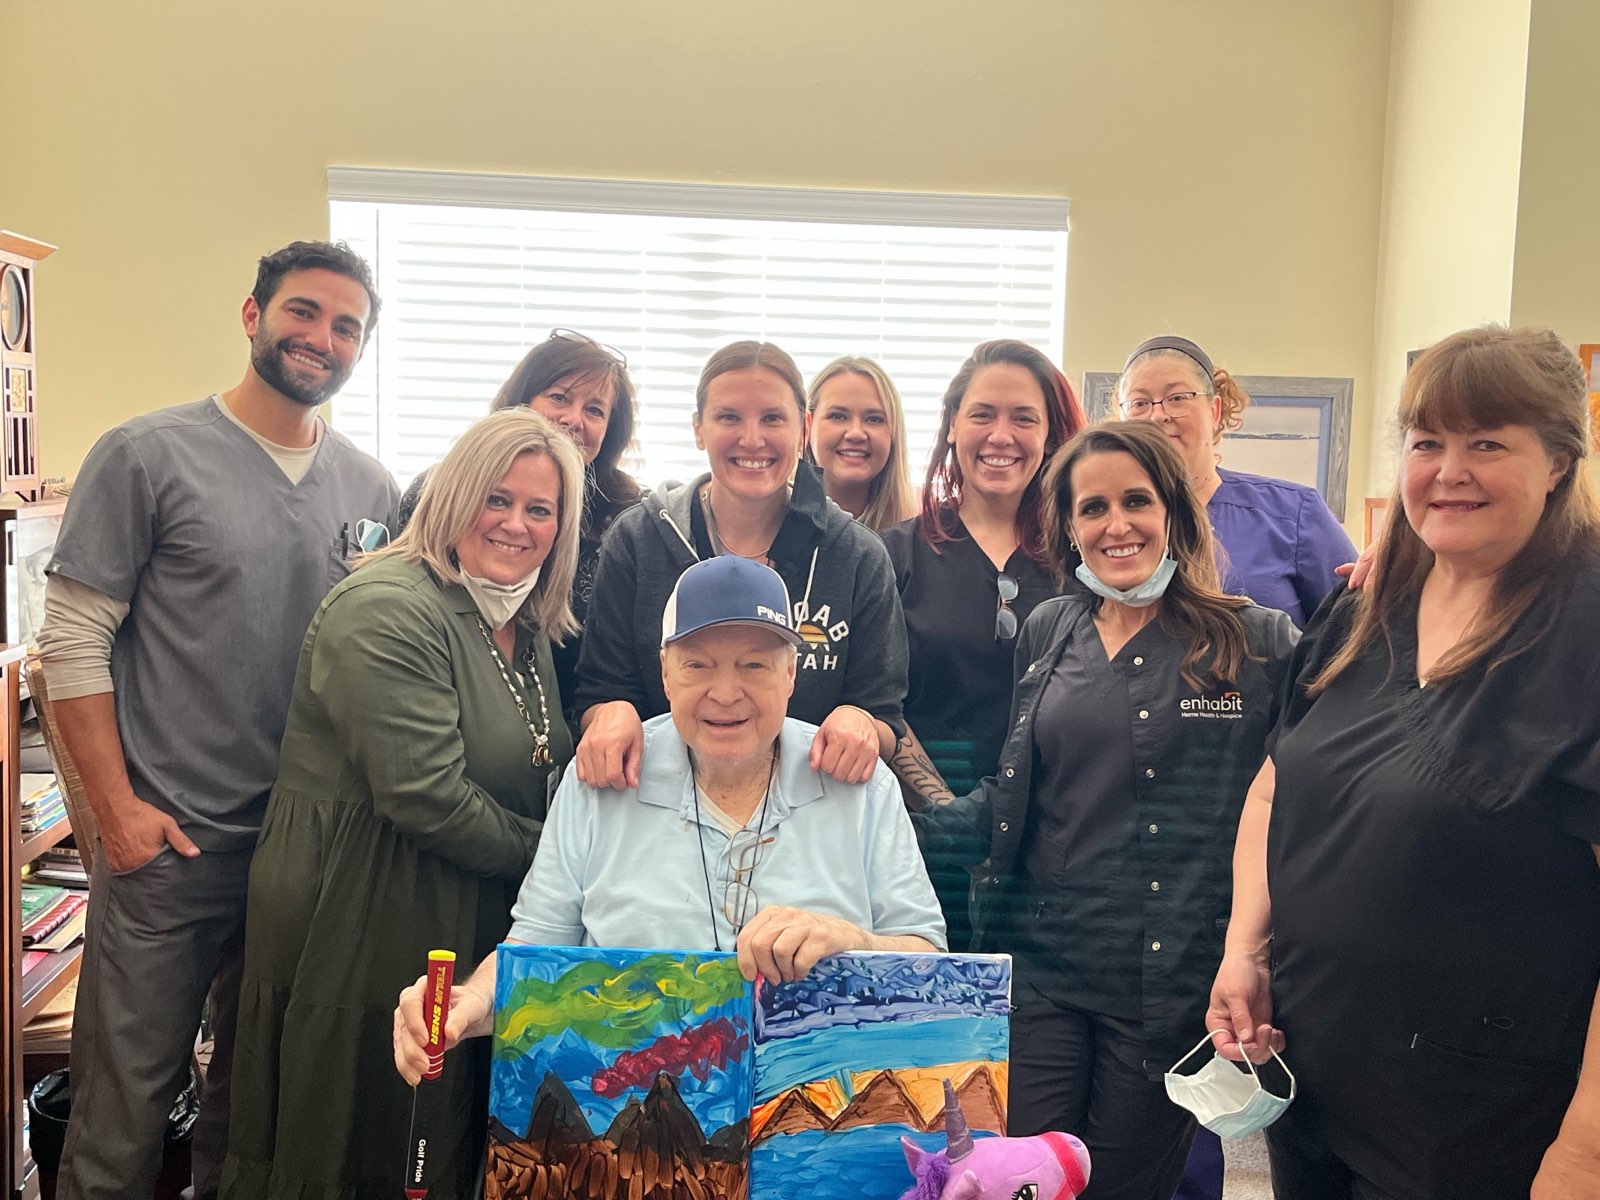 Checking off a hospice patient’s bucket list